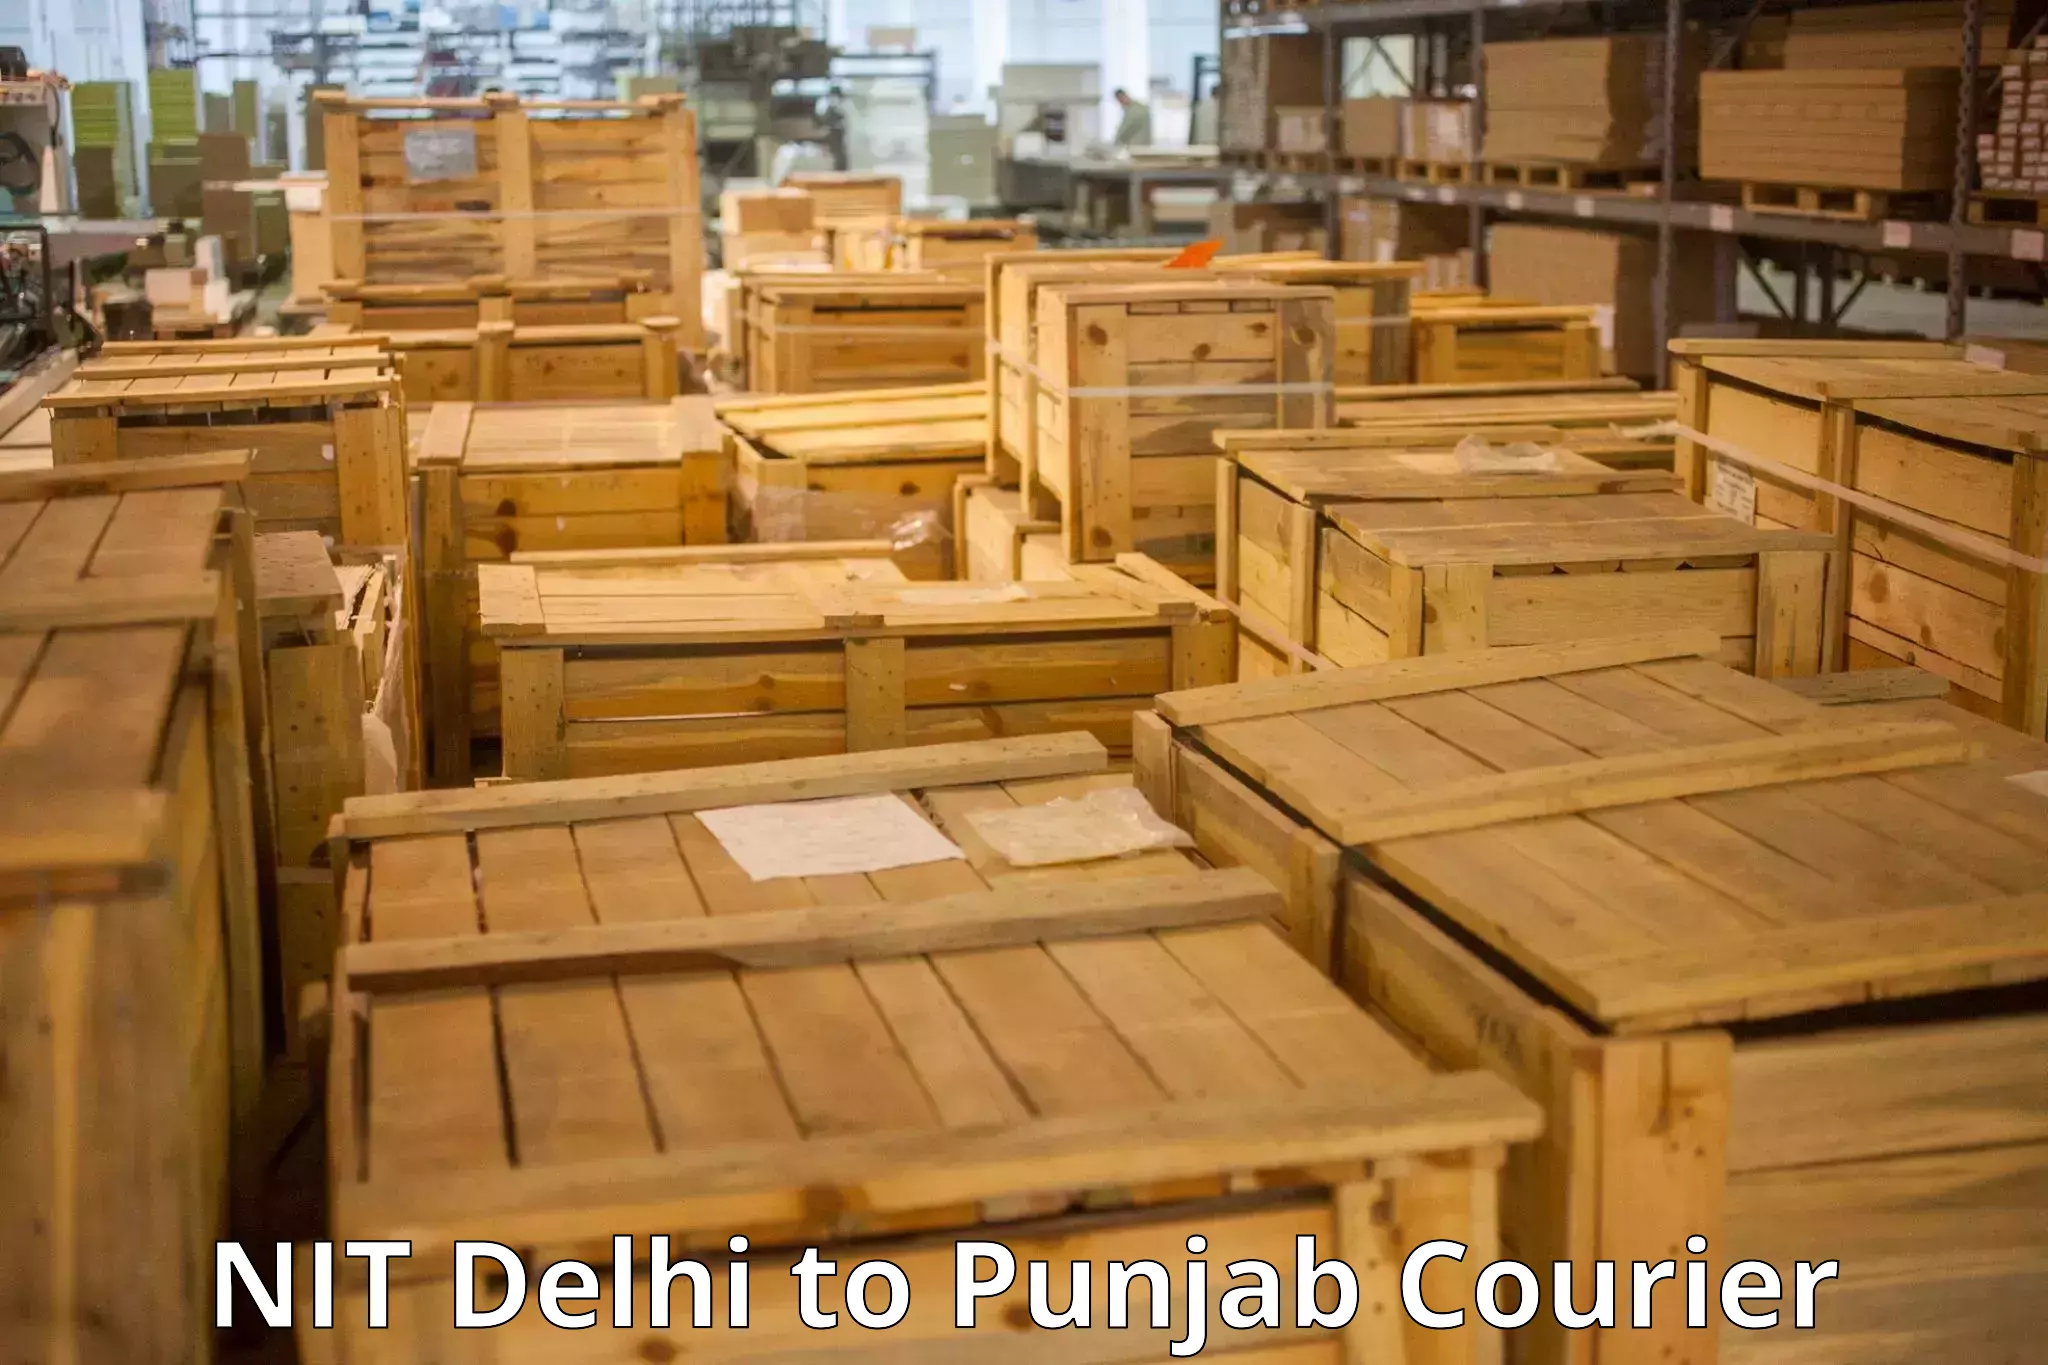 Excess baggage transport in NIT Delhi to Pathankot